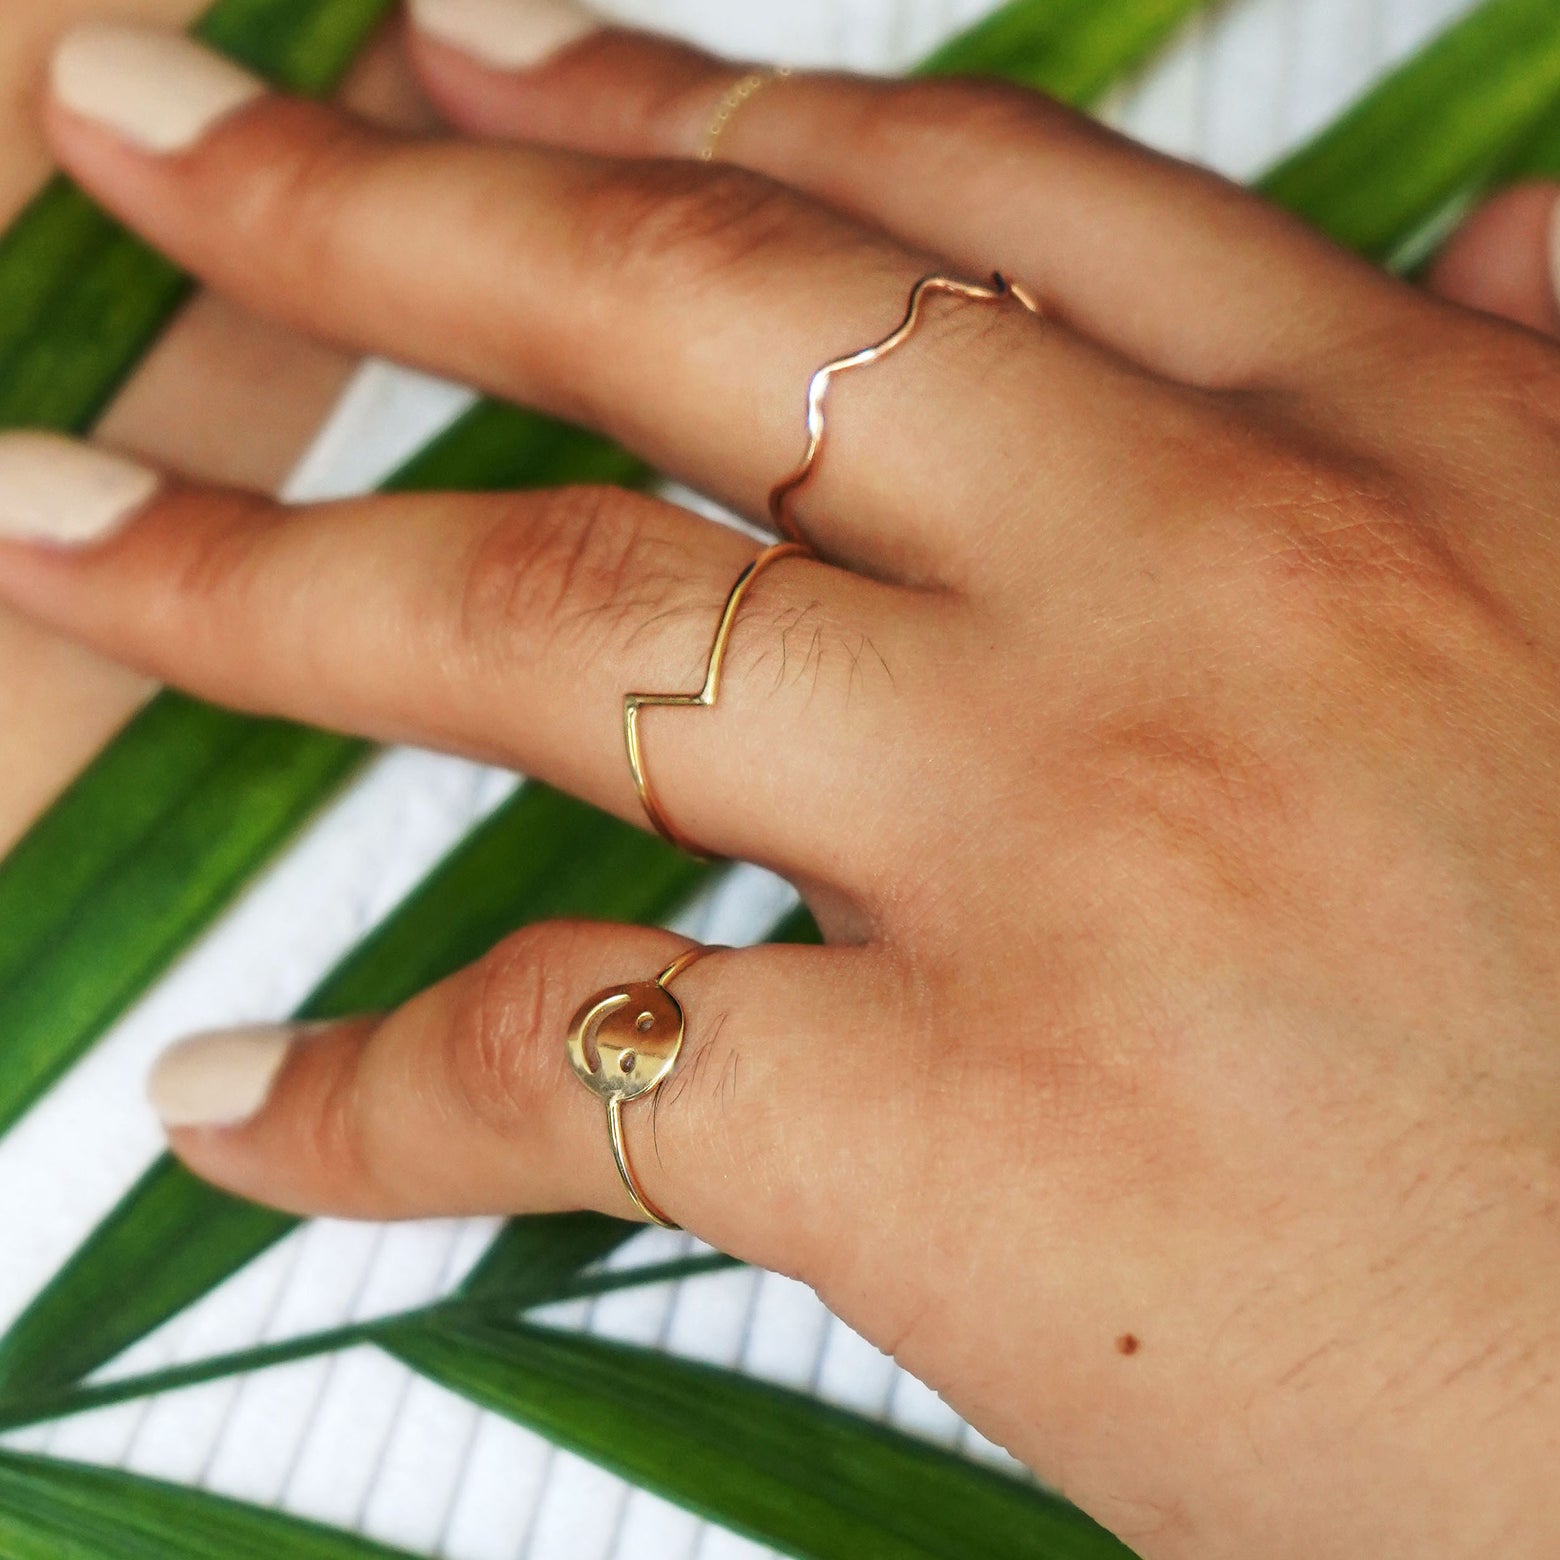 A model's hand on their chest holding a palm leaf wearing a Zig Zag Ring and other Automic Gold rings